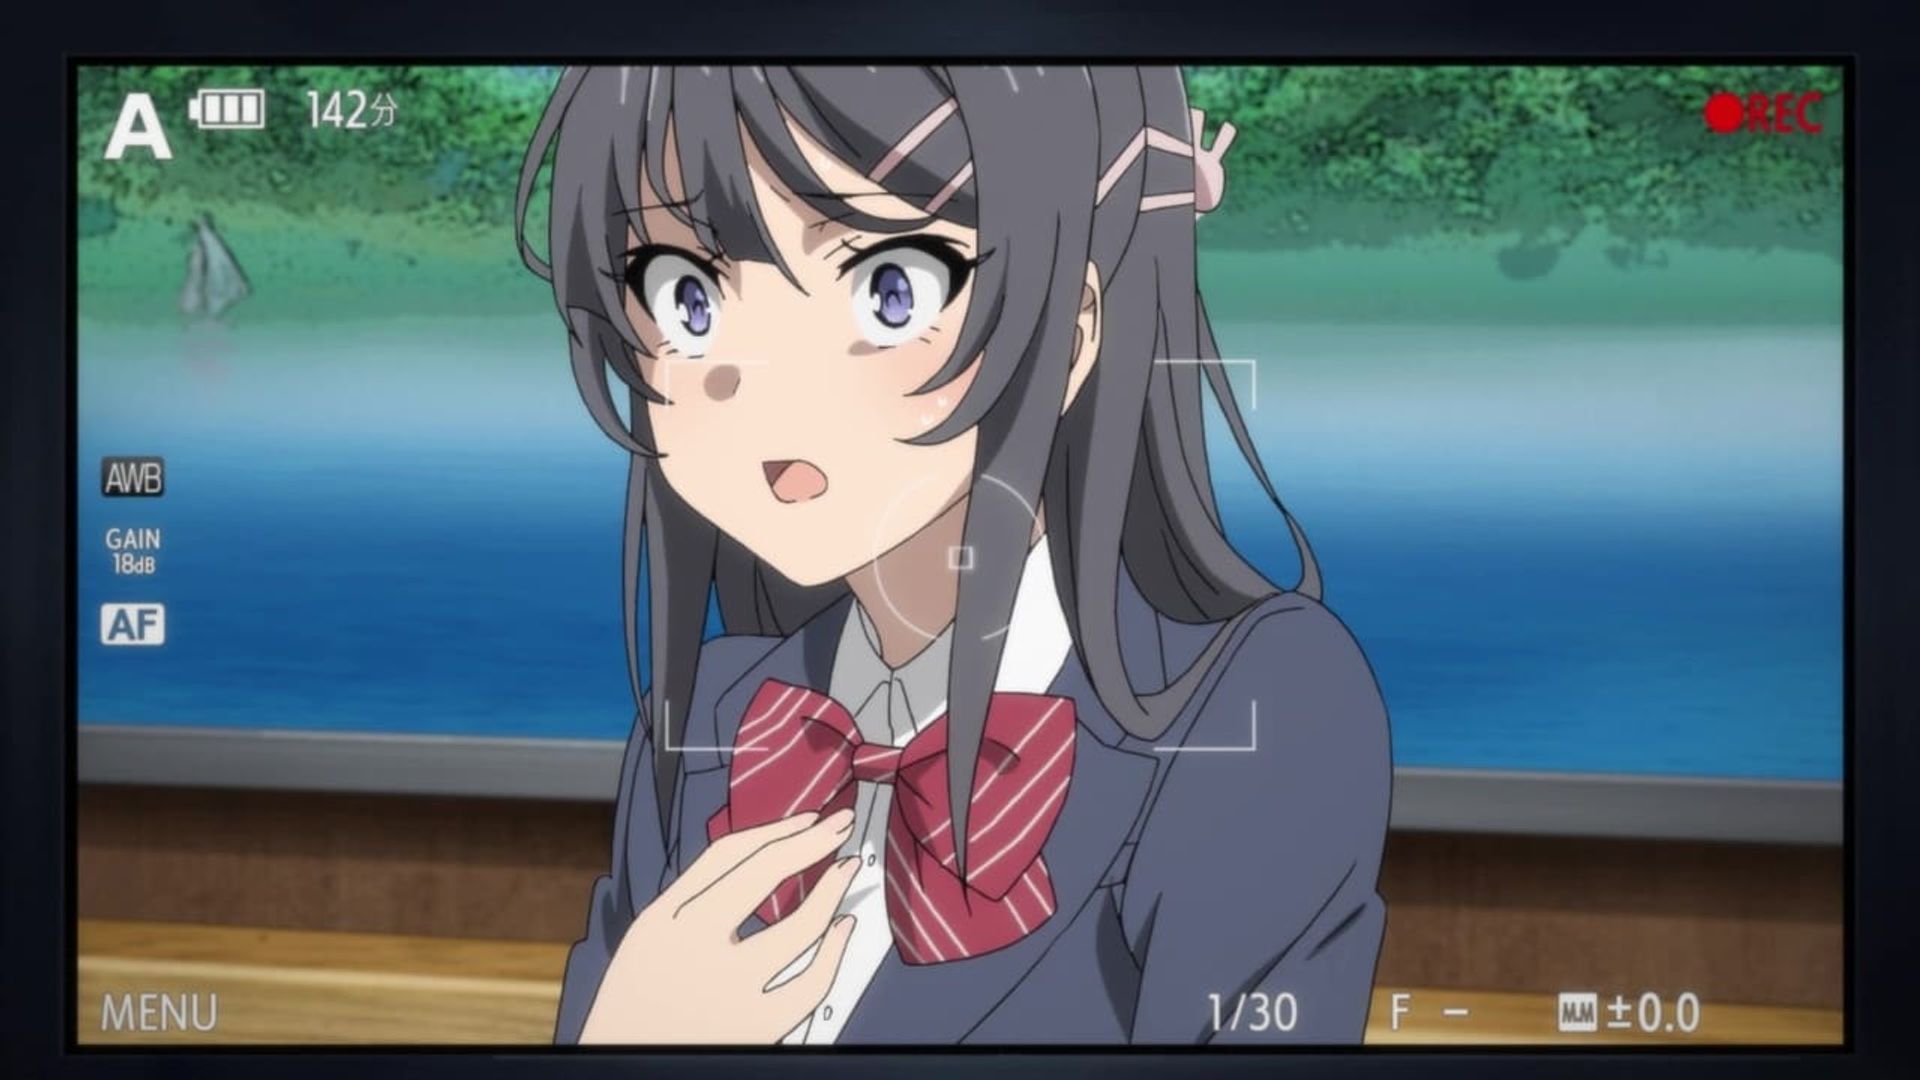 Rascal Does Not Dream of Bunny Girl Senpai background